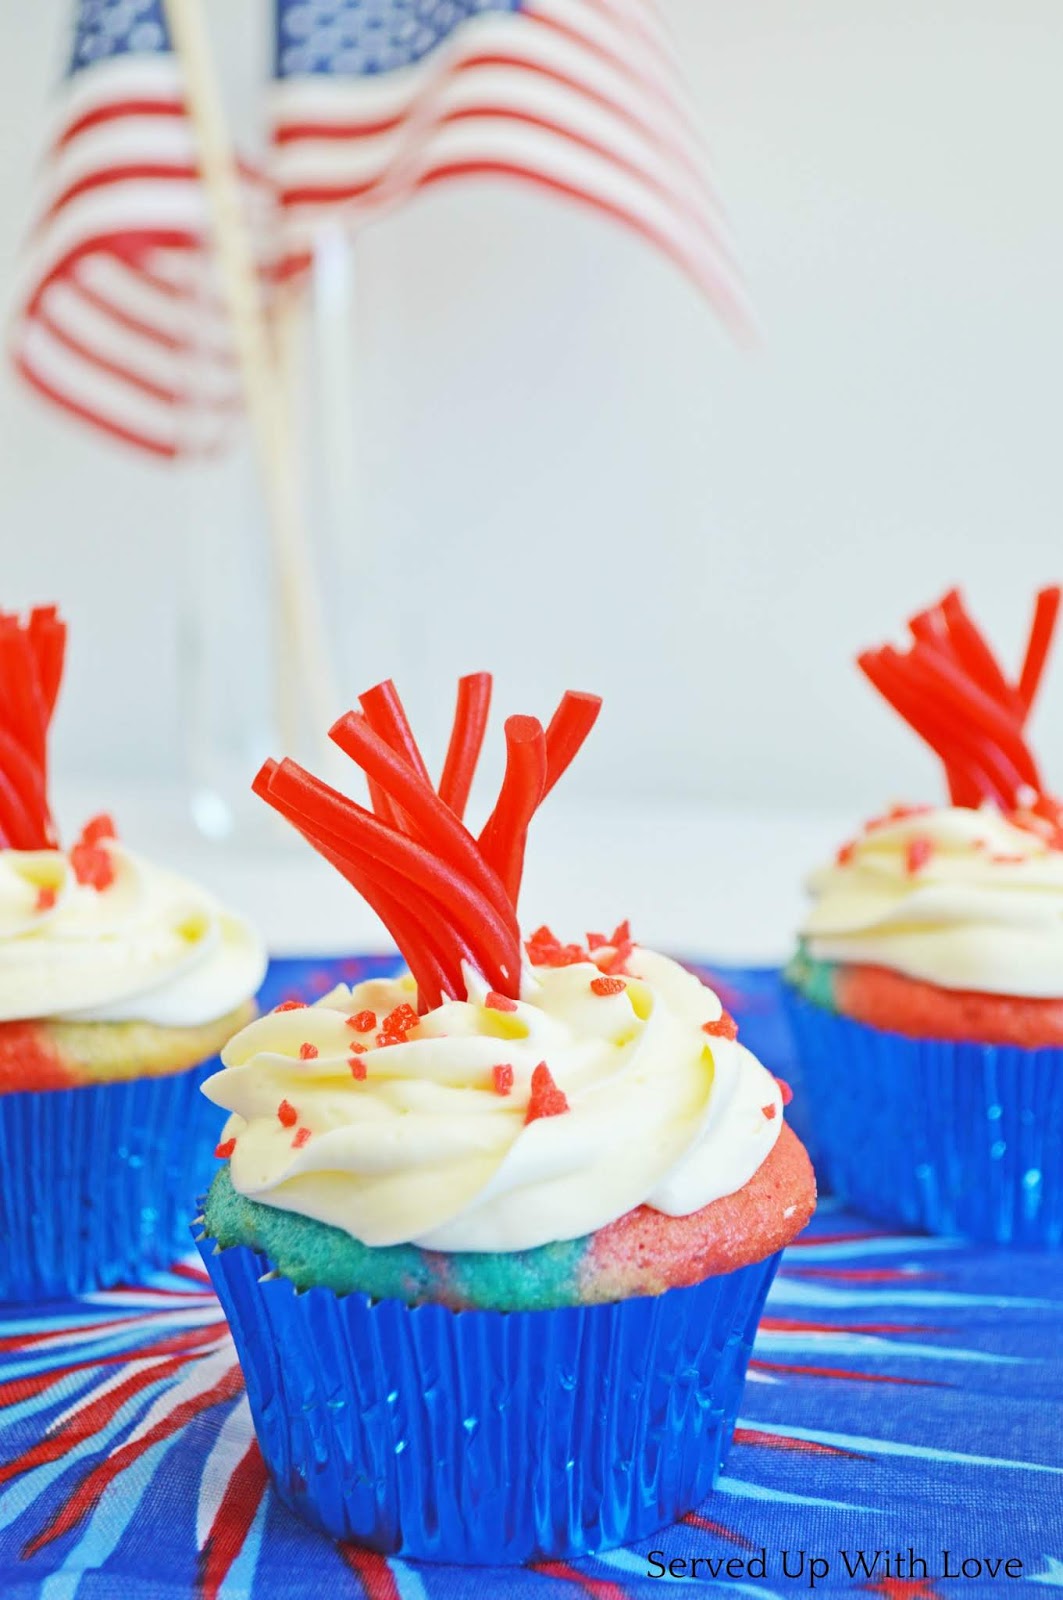 Served Up With Love: Firework Cupcakes